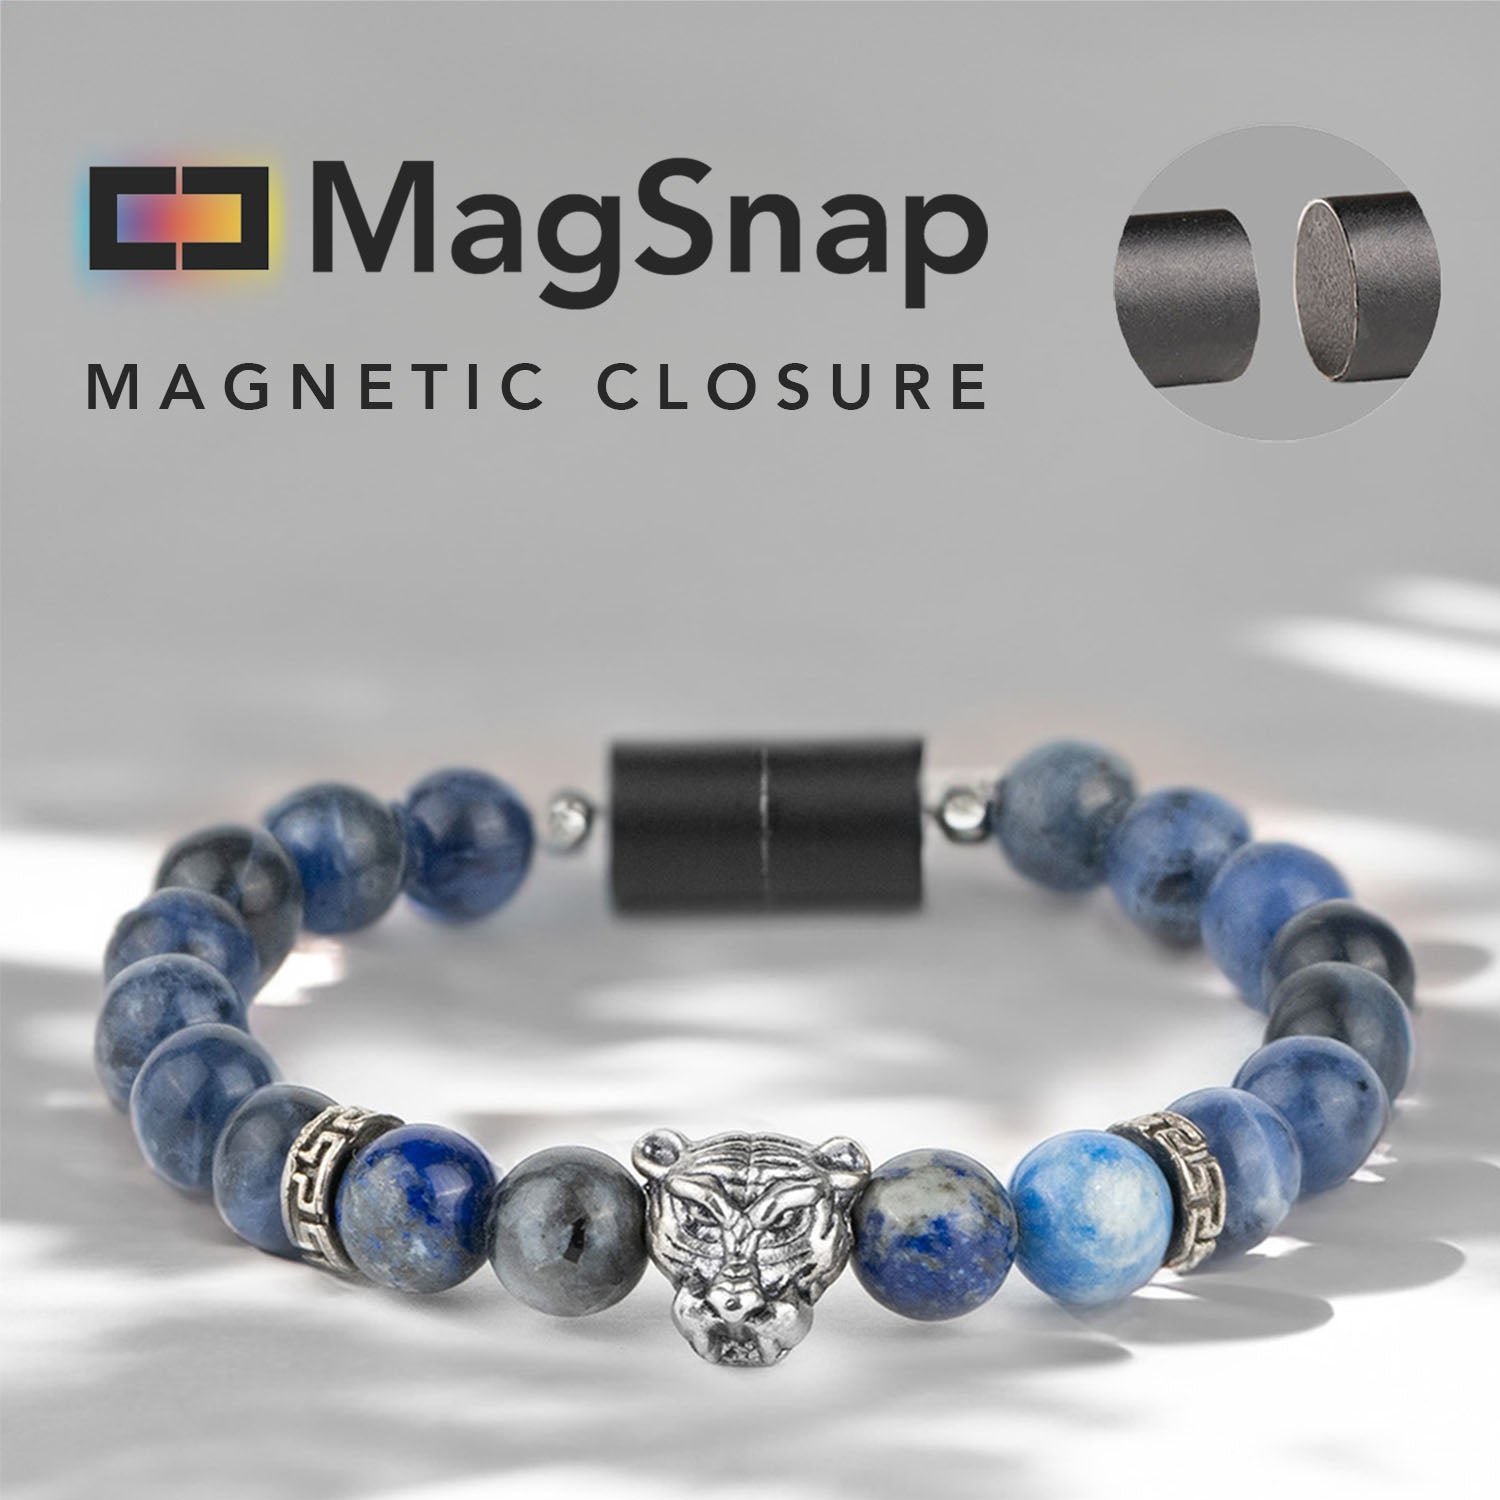 Natural Stone Jewellery Wisdom Lapis Lazuli Natural Stone Panther Bracelet With Magsnap